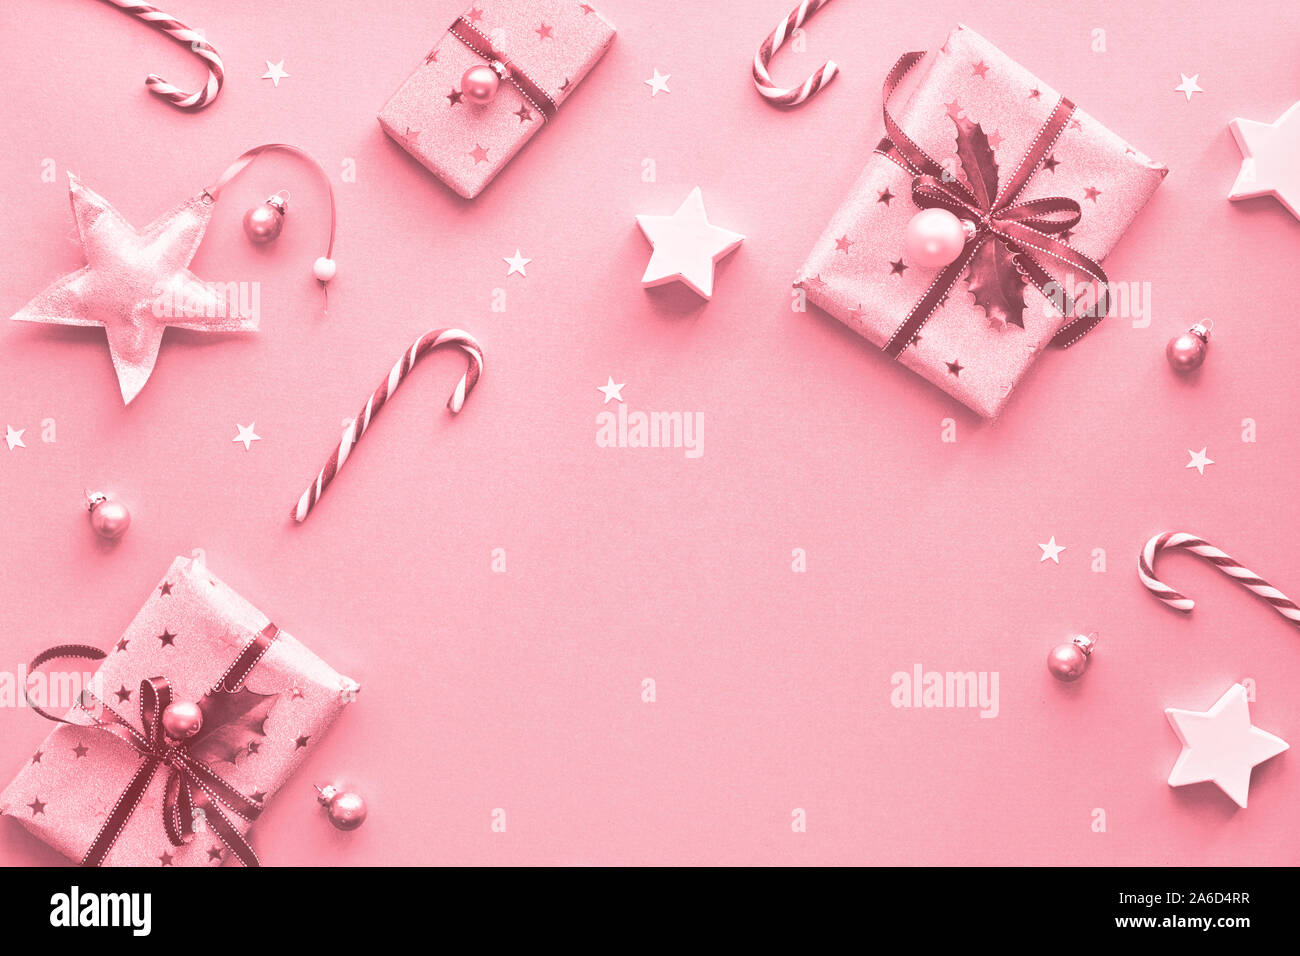 Festive monochrome pink Christmas background with pink gift boxes ...